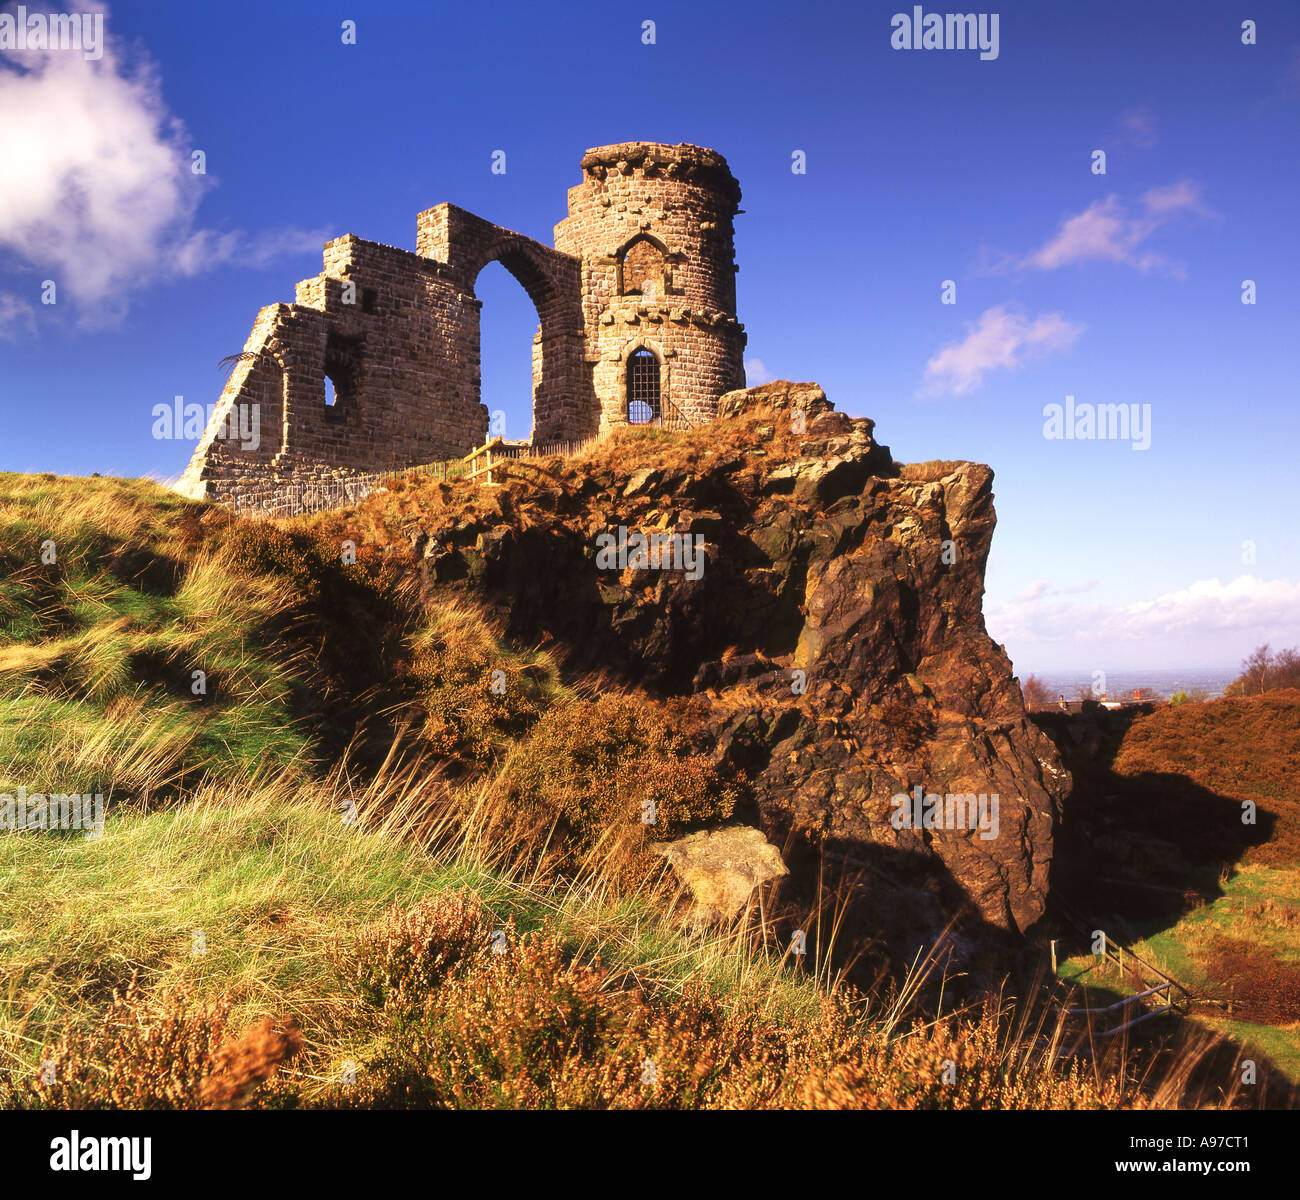 Folly of Mow Cop Castle on the Cheshire and Staffordshire Border, England, UK Stock Photo